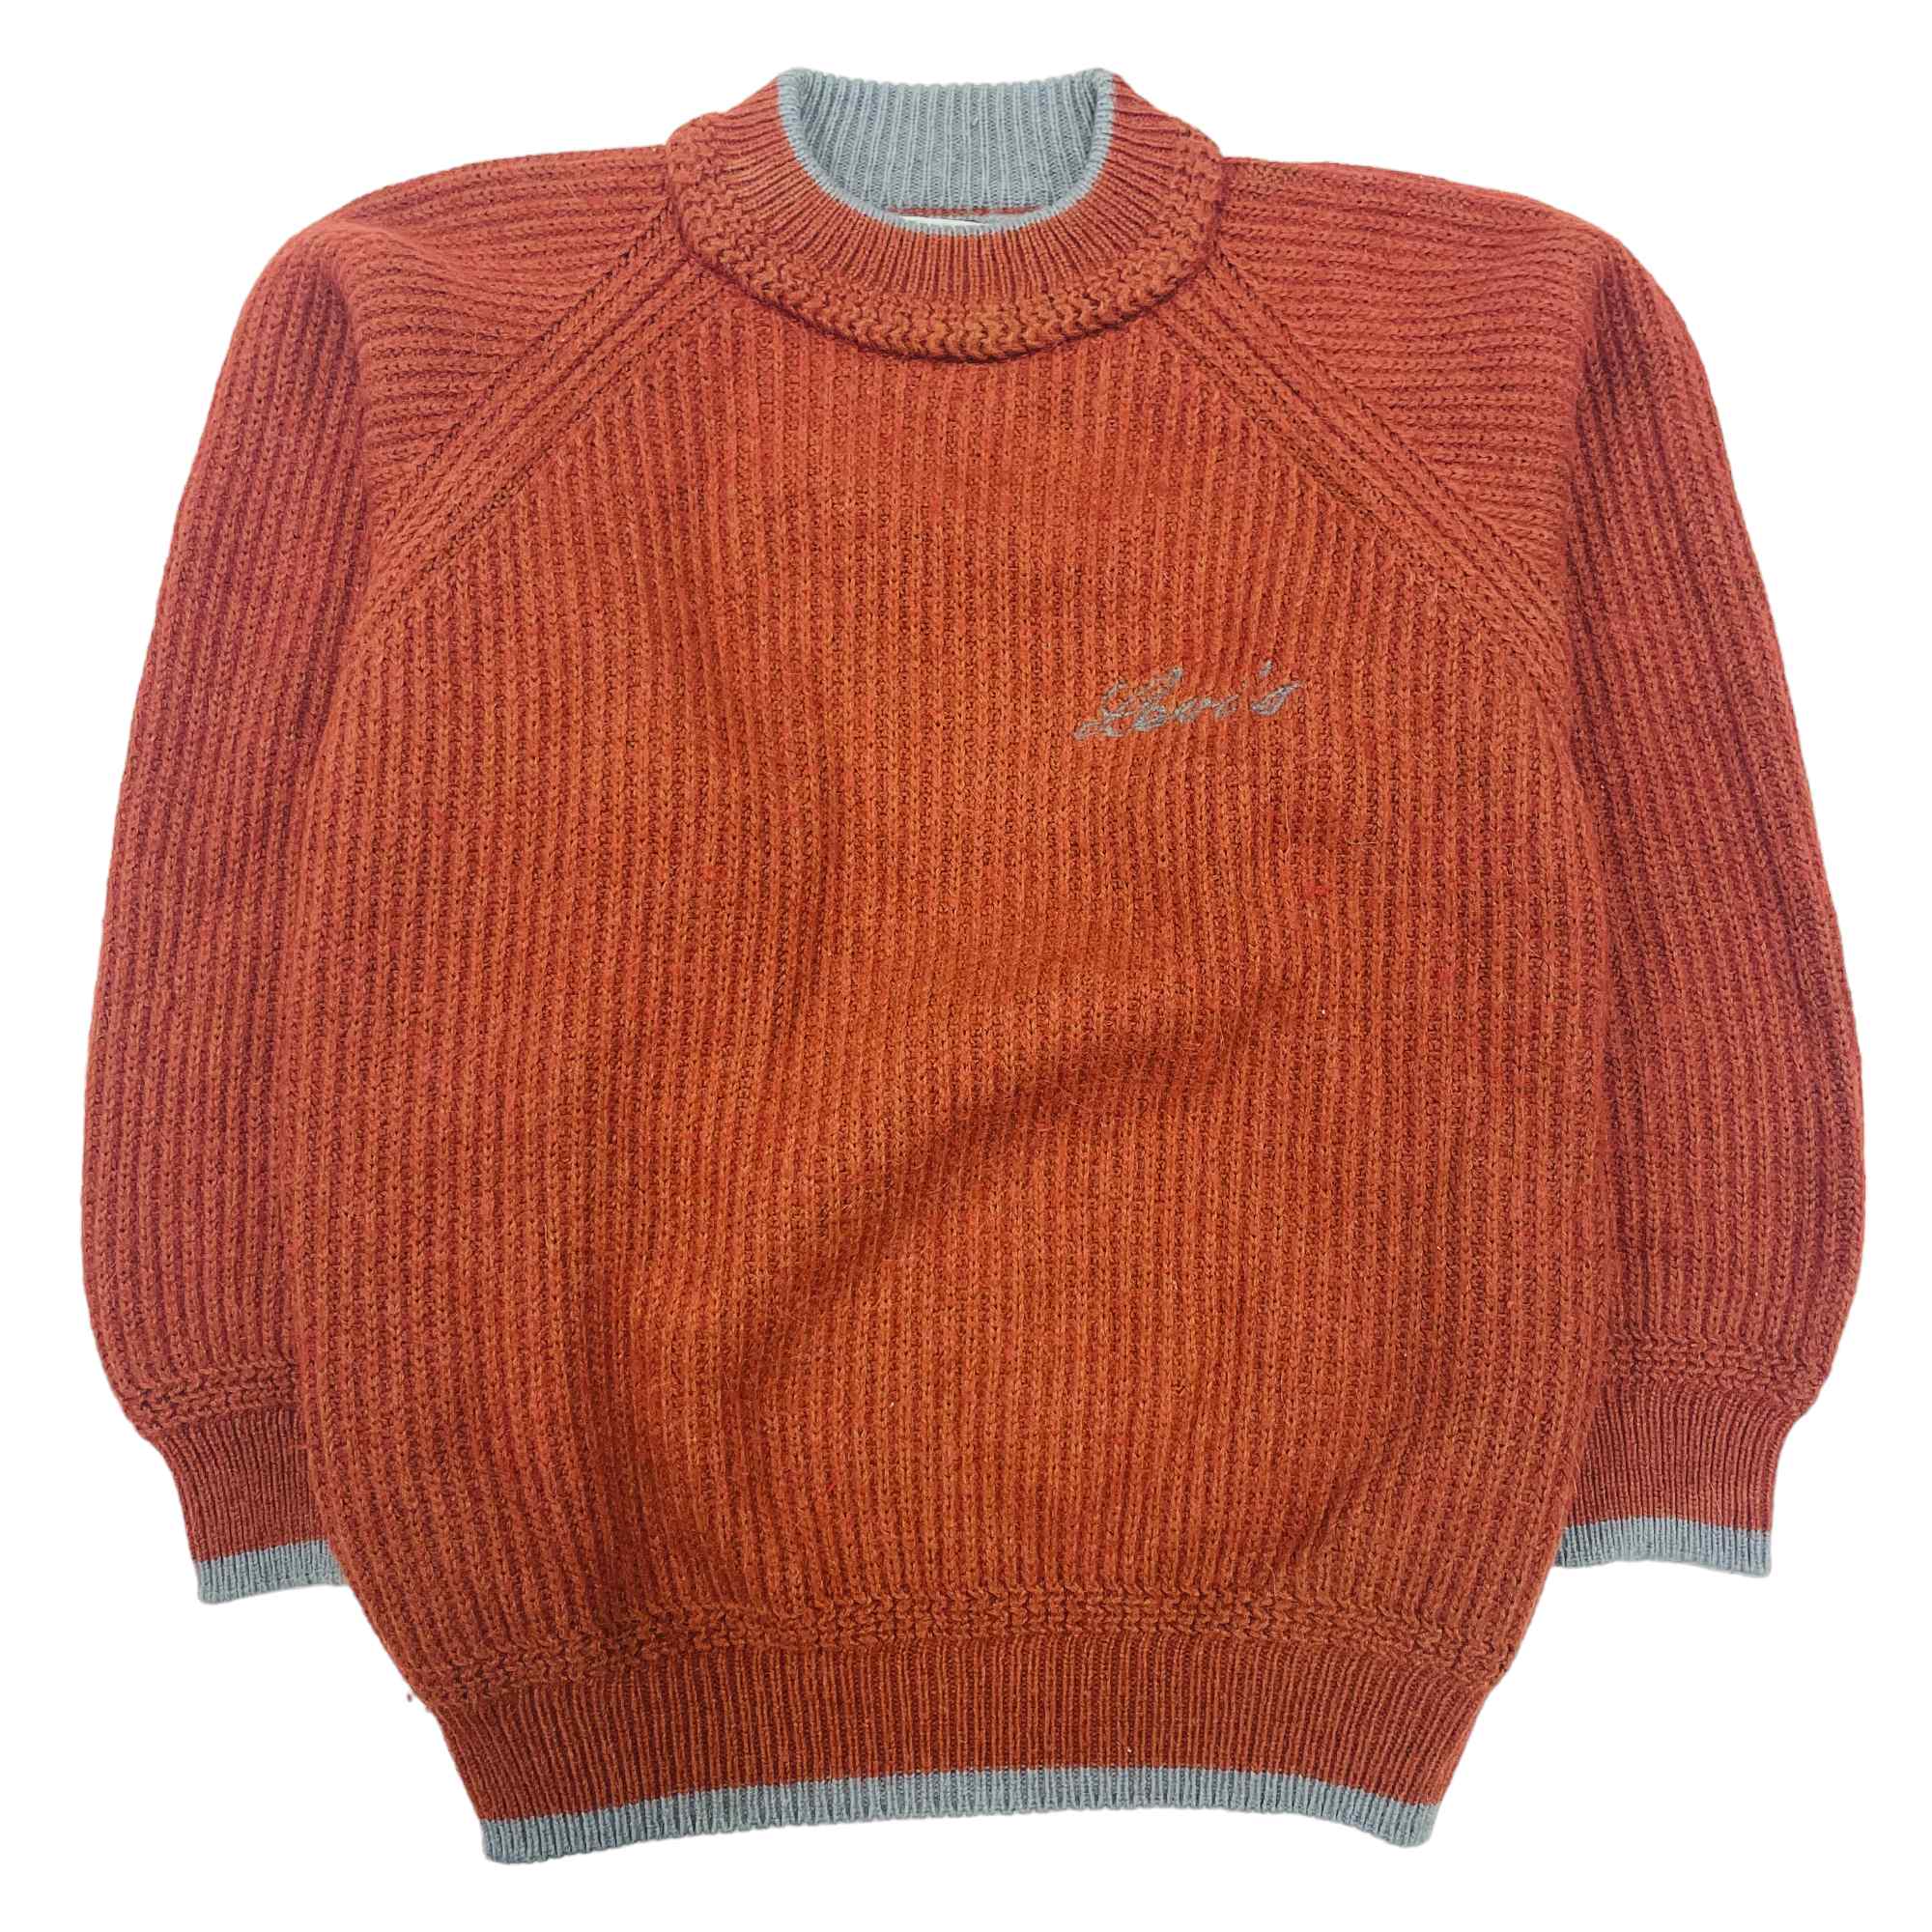 Levi's Knitted Jumper - 2XL